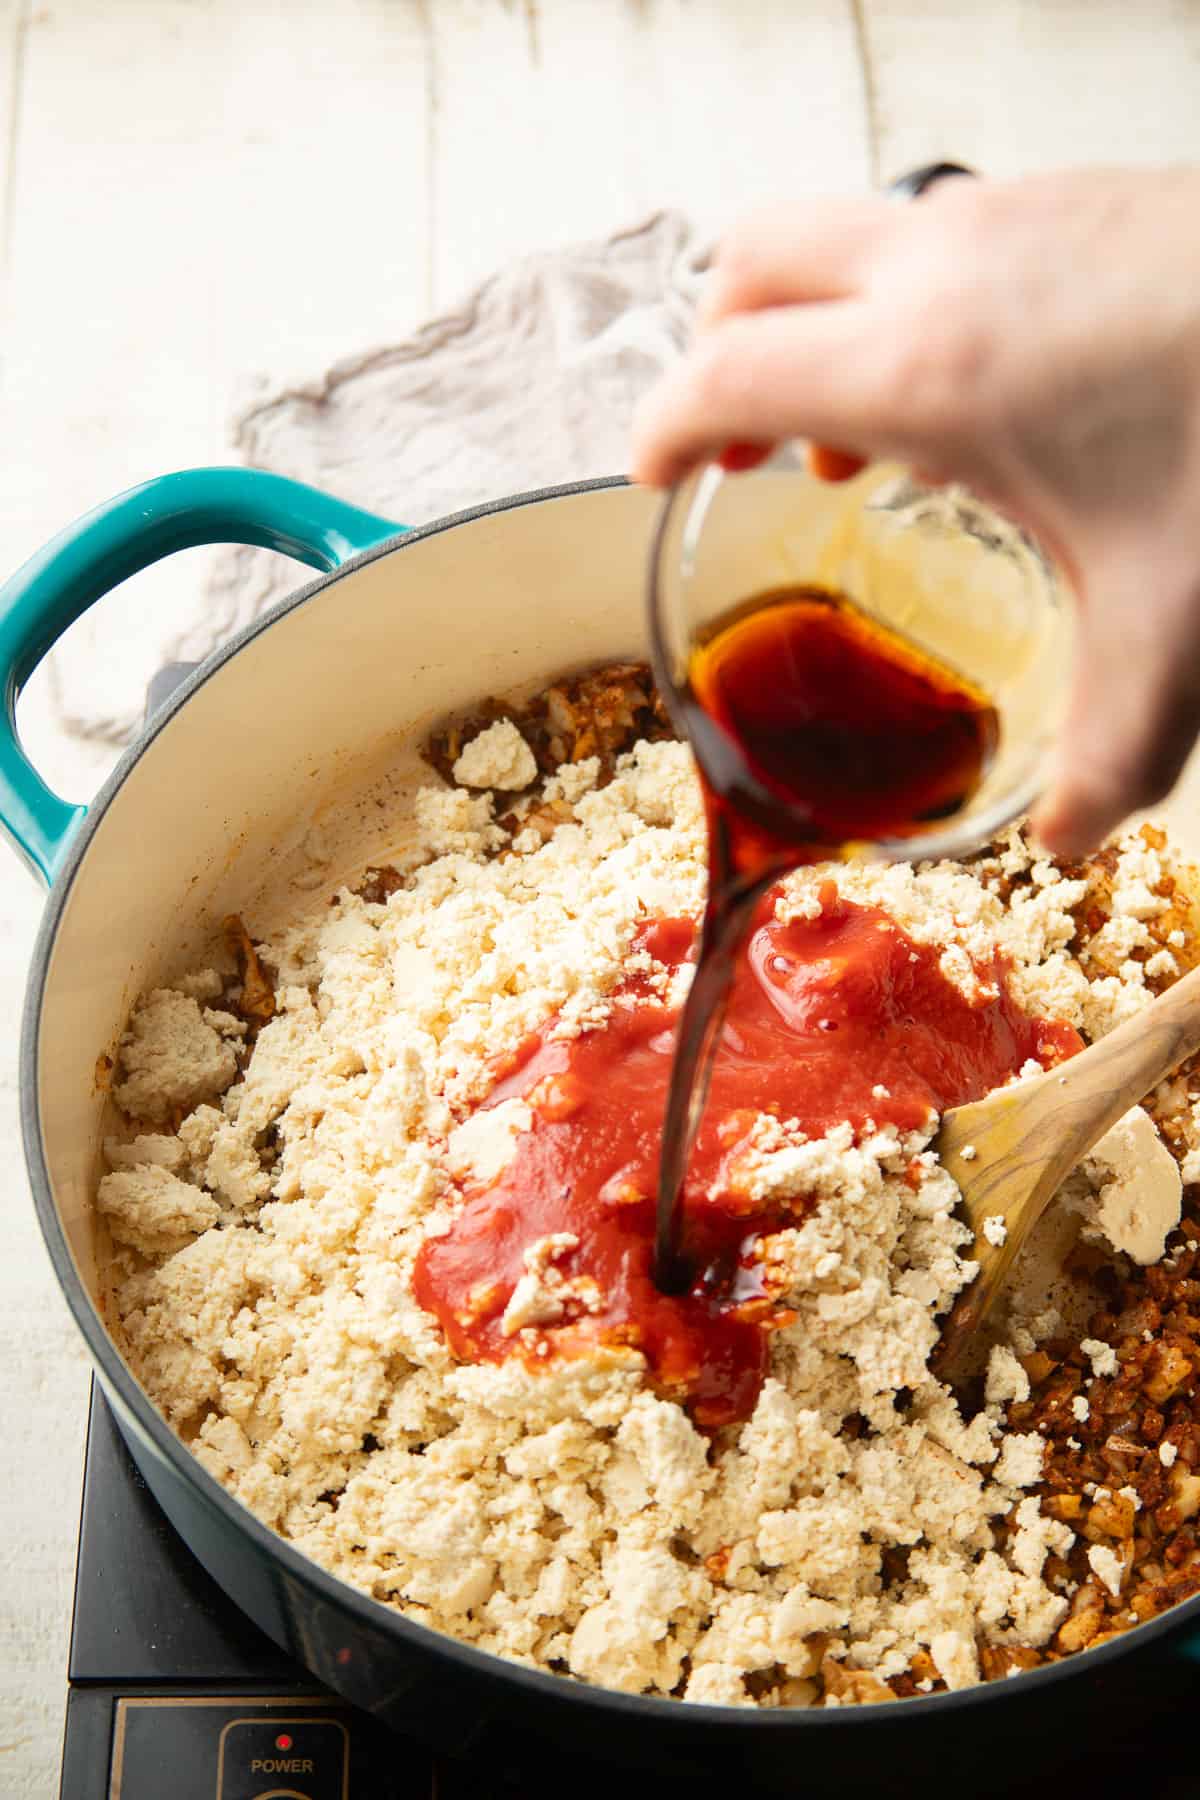 Hand pouring soy sauce into a skillet filled with crumbled tofu, walnuts, spices, and tomato sauce.